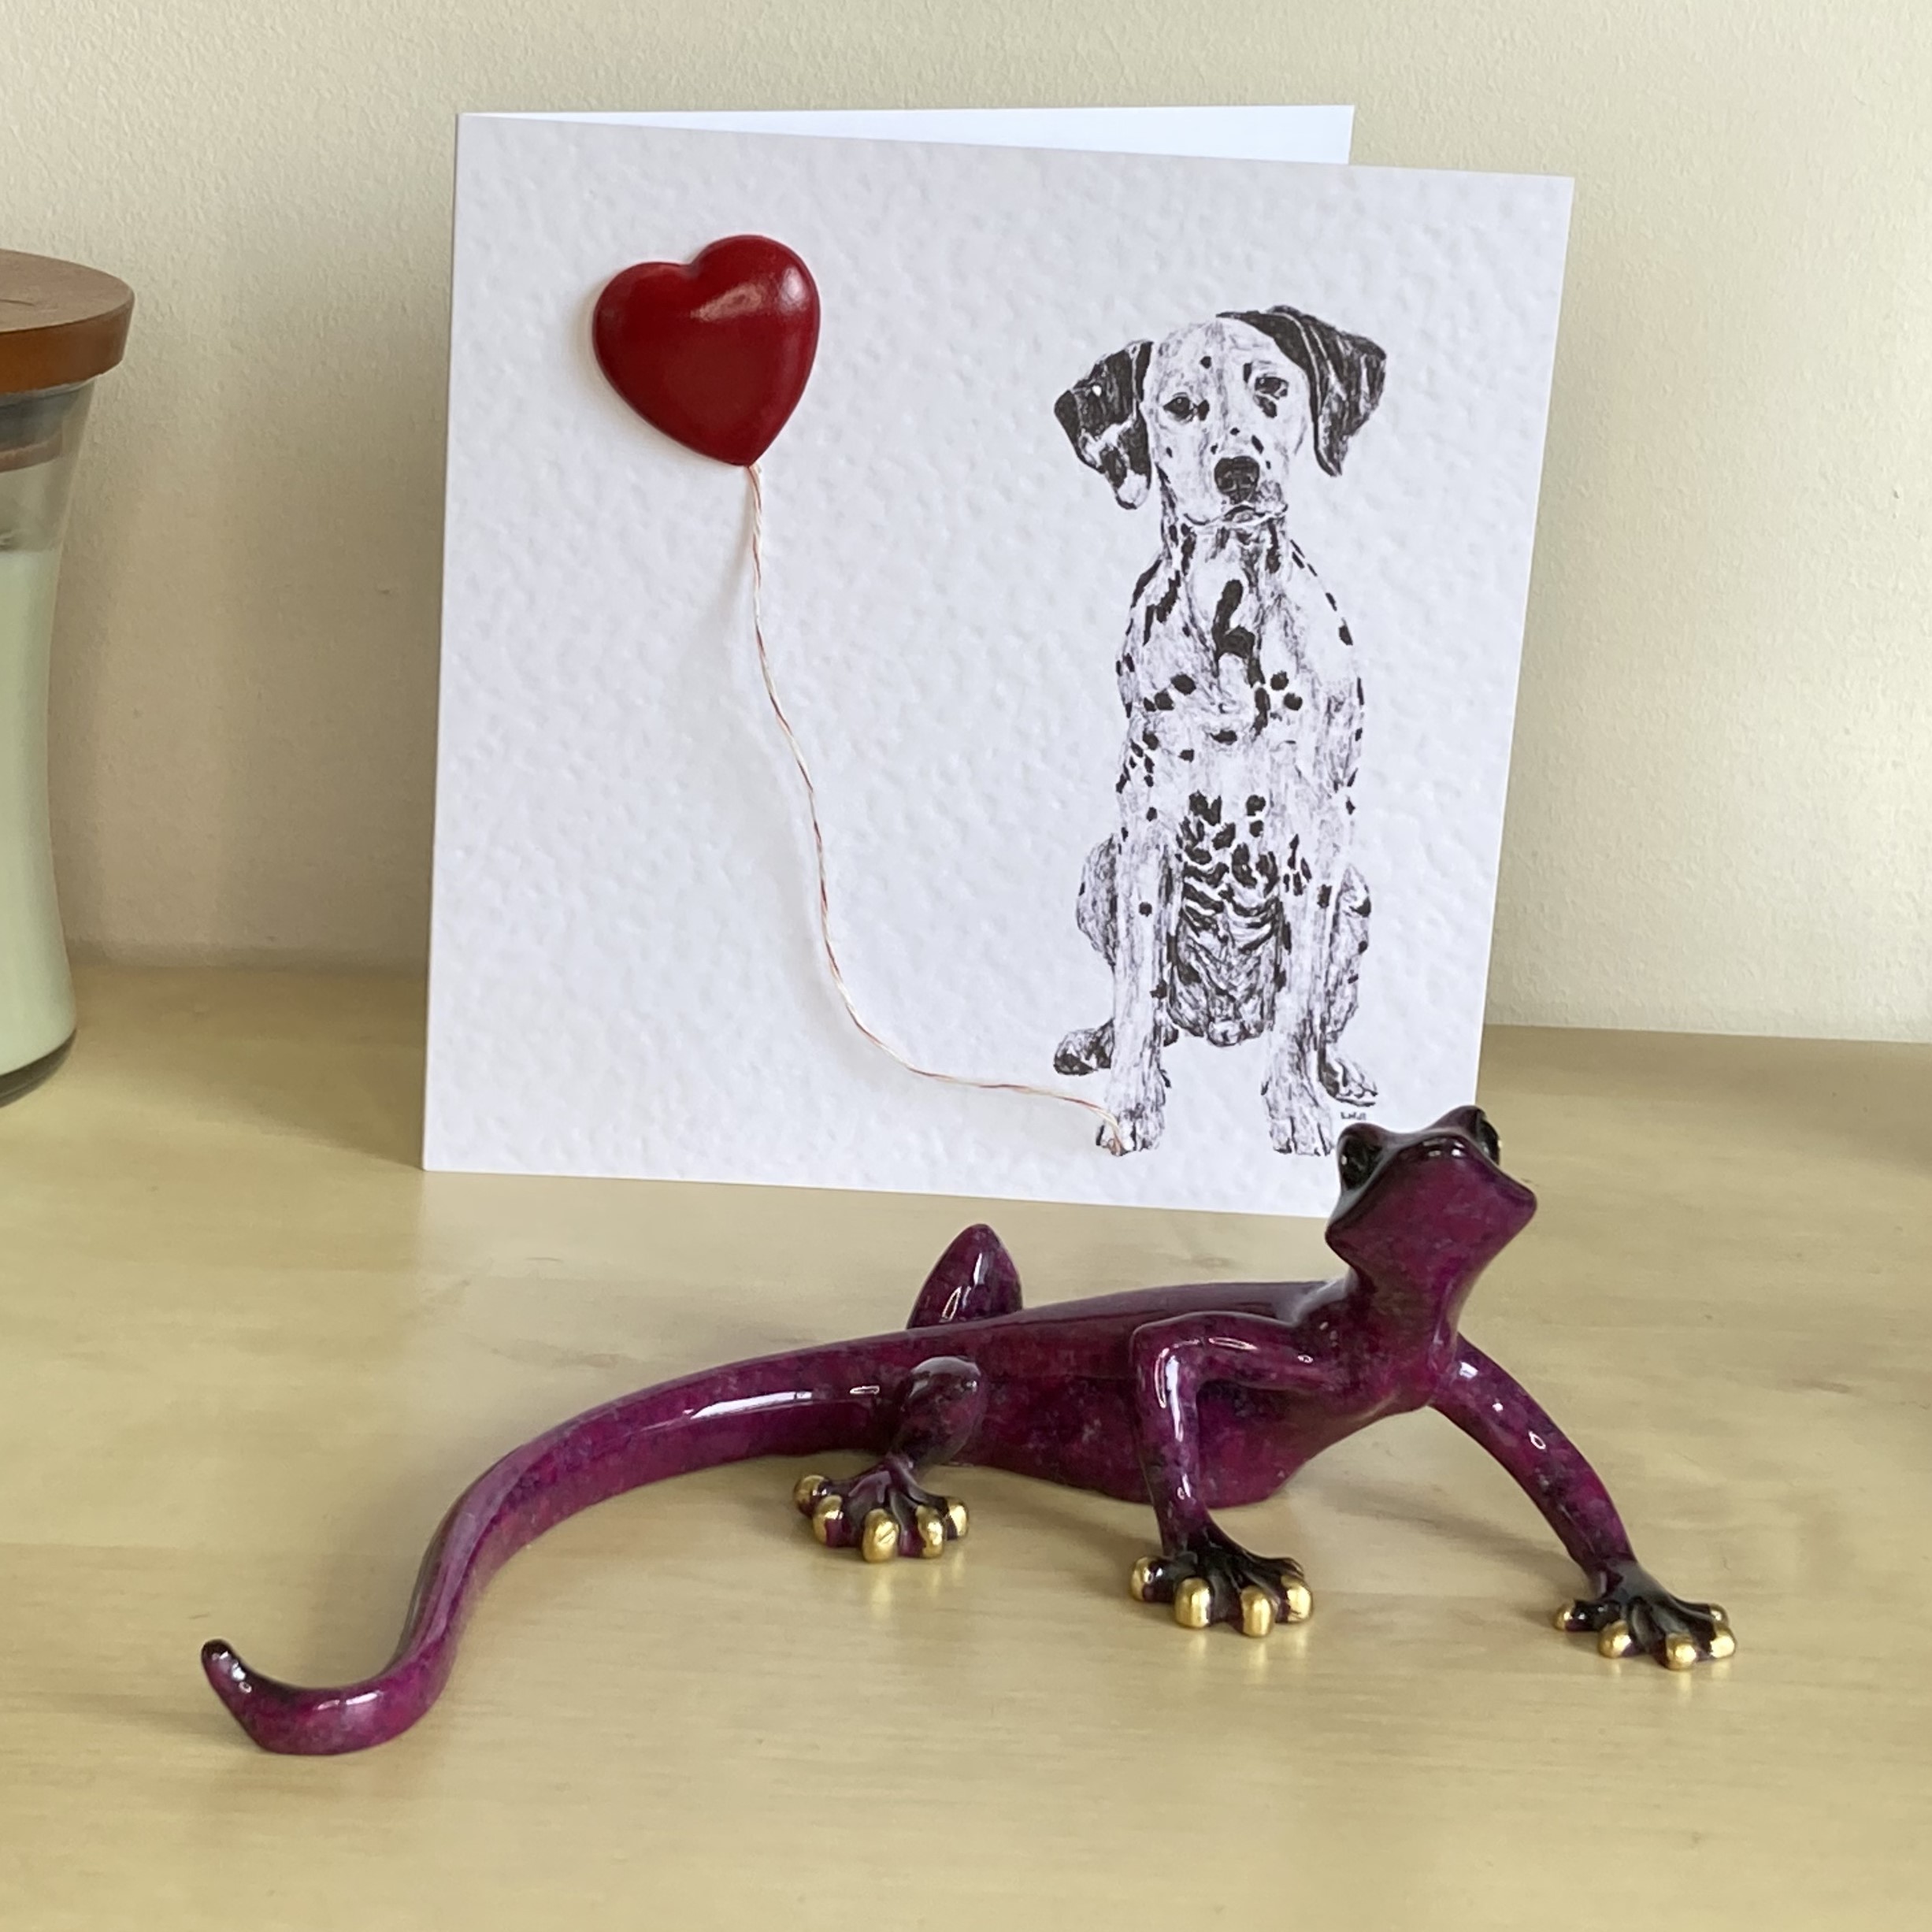 Dalmatian 15cm greetings card with 3D red heart balloon